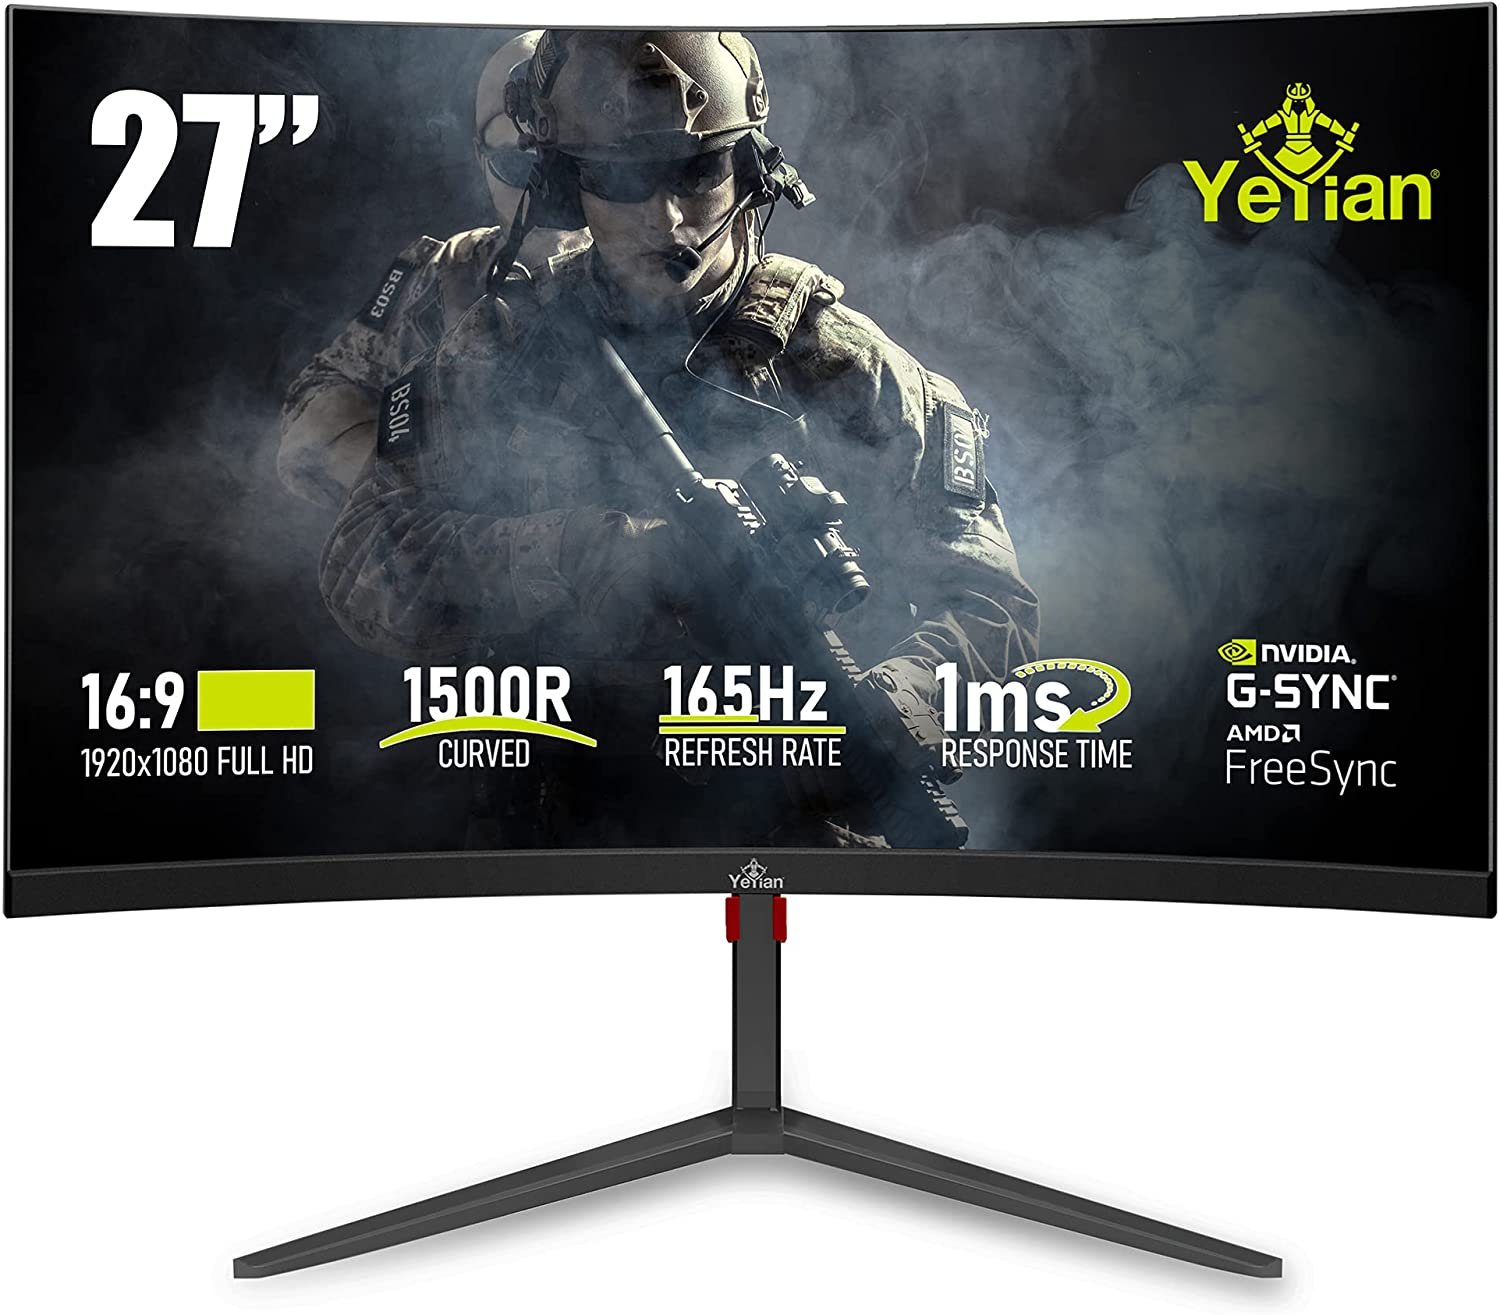 YEYIAN Sigurd 3001 27” Curved PC Gaming Frameless LED Multistand Monitor